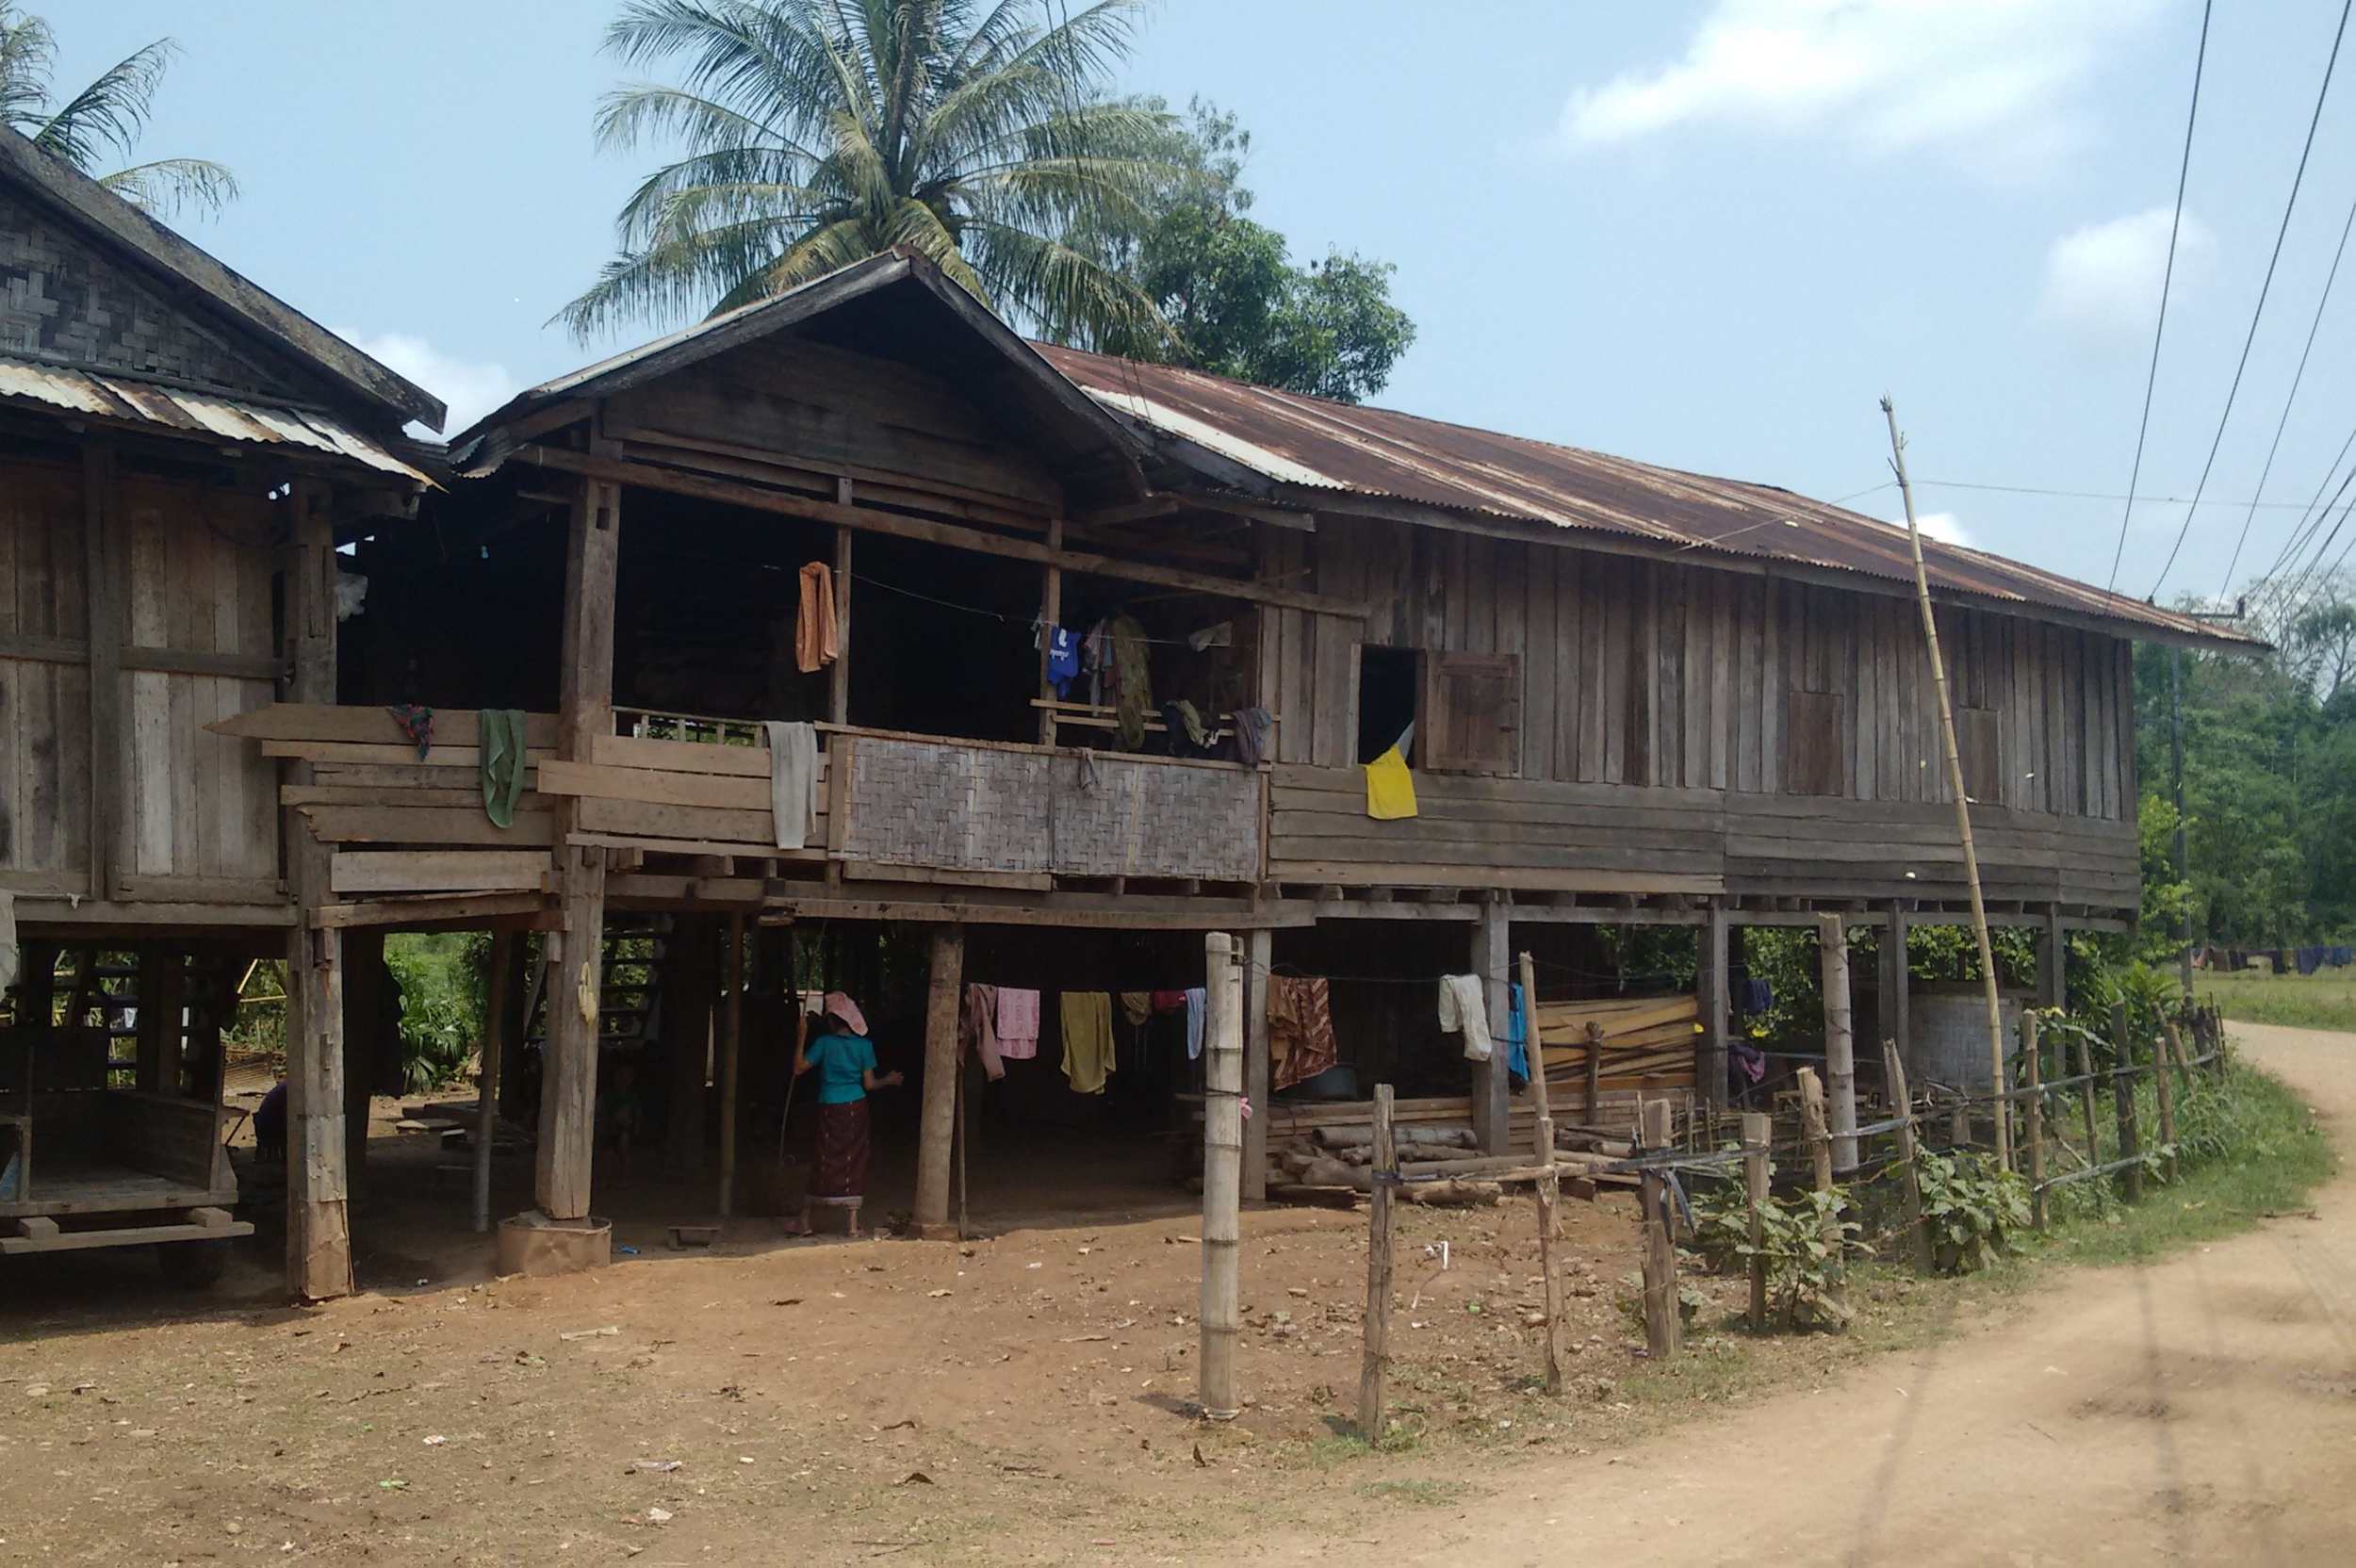 Typical wooden house in the nearby villages